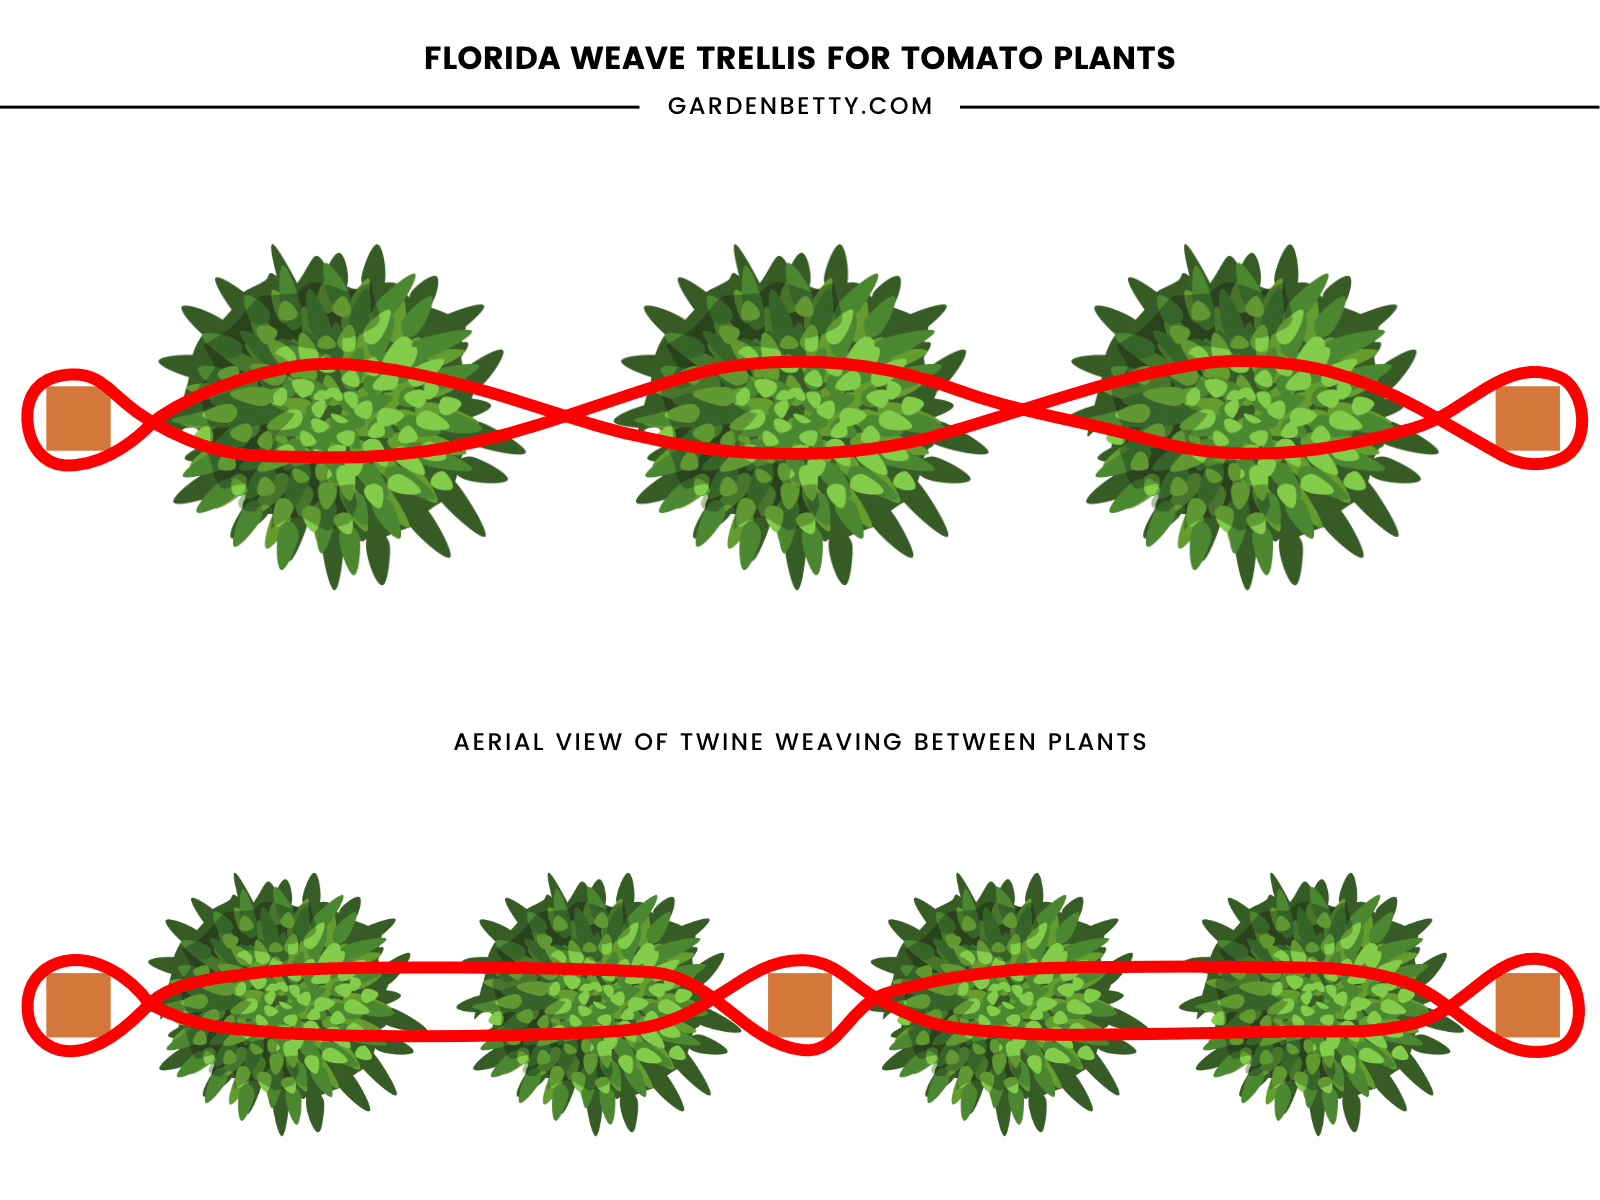 Illustration showing two different ways to make a Florida weave trellis for tomato plants